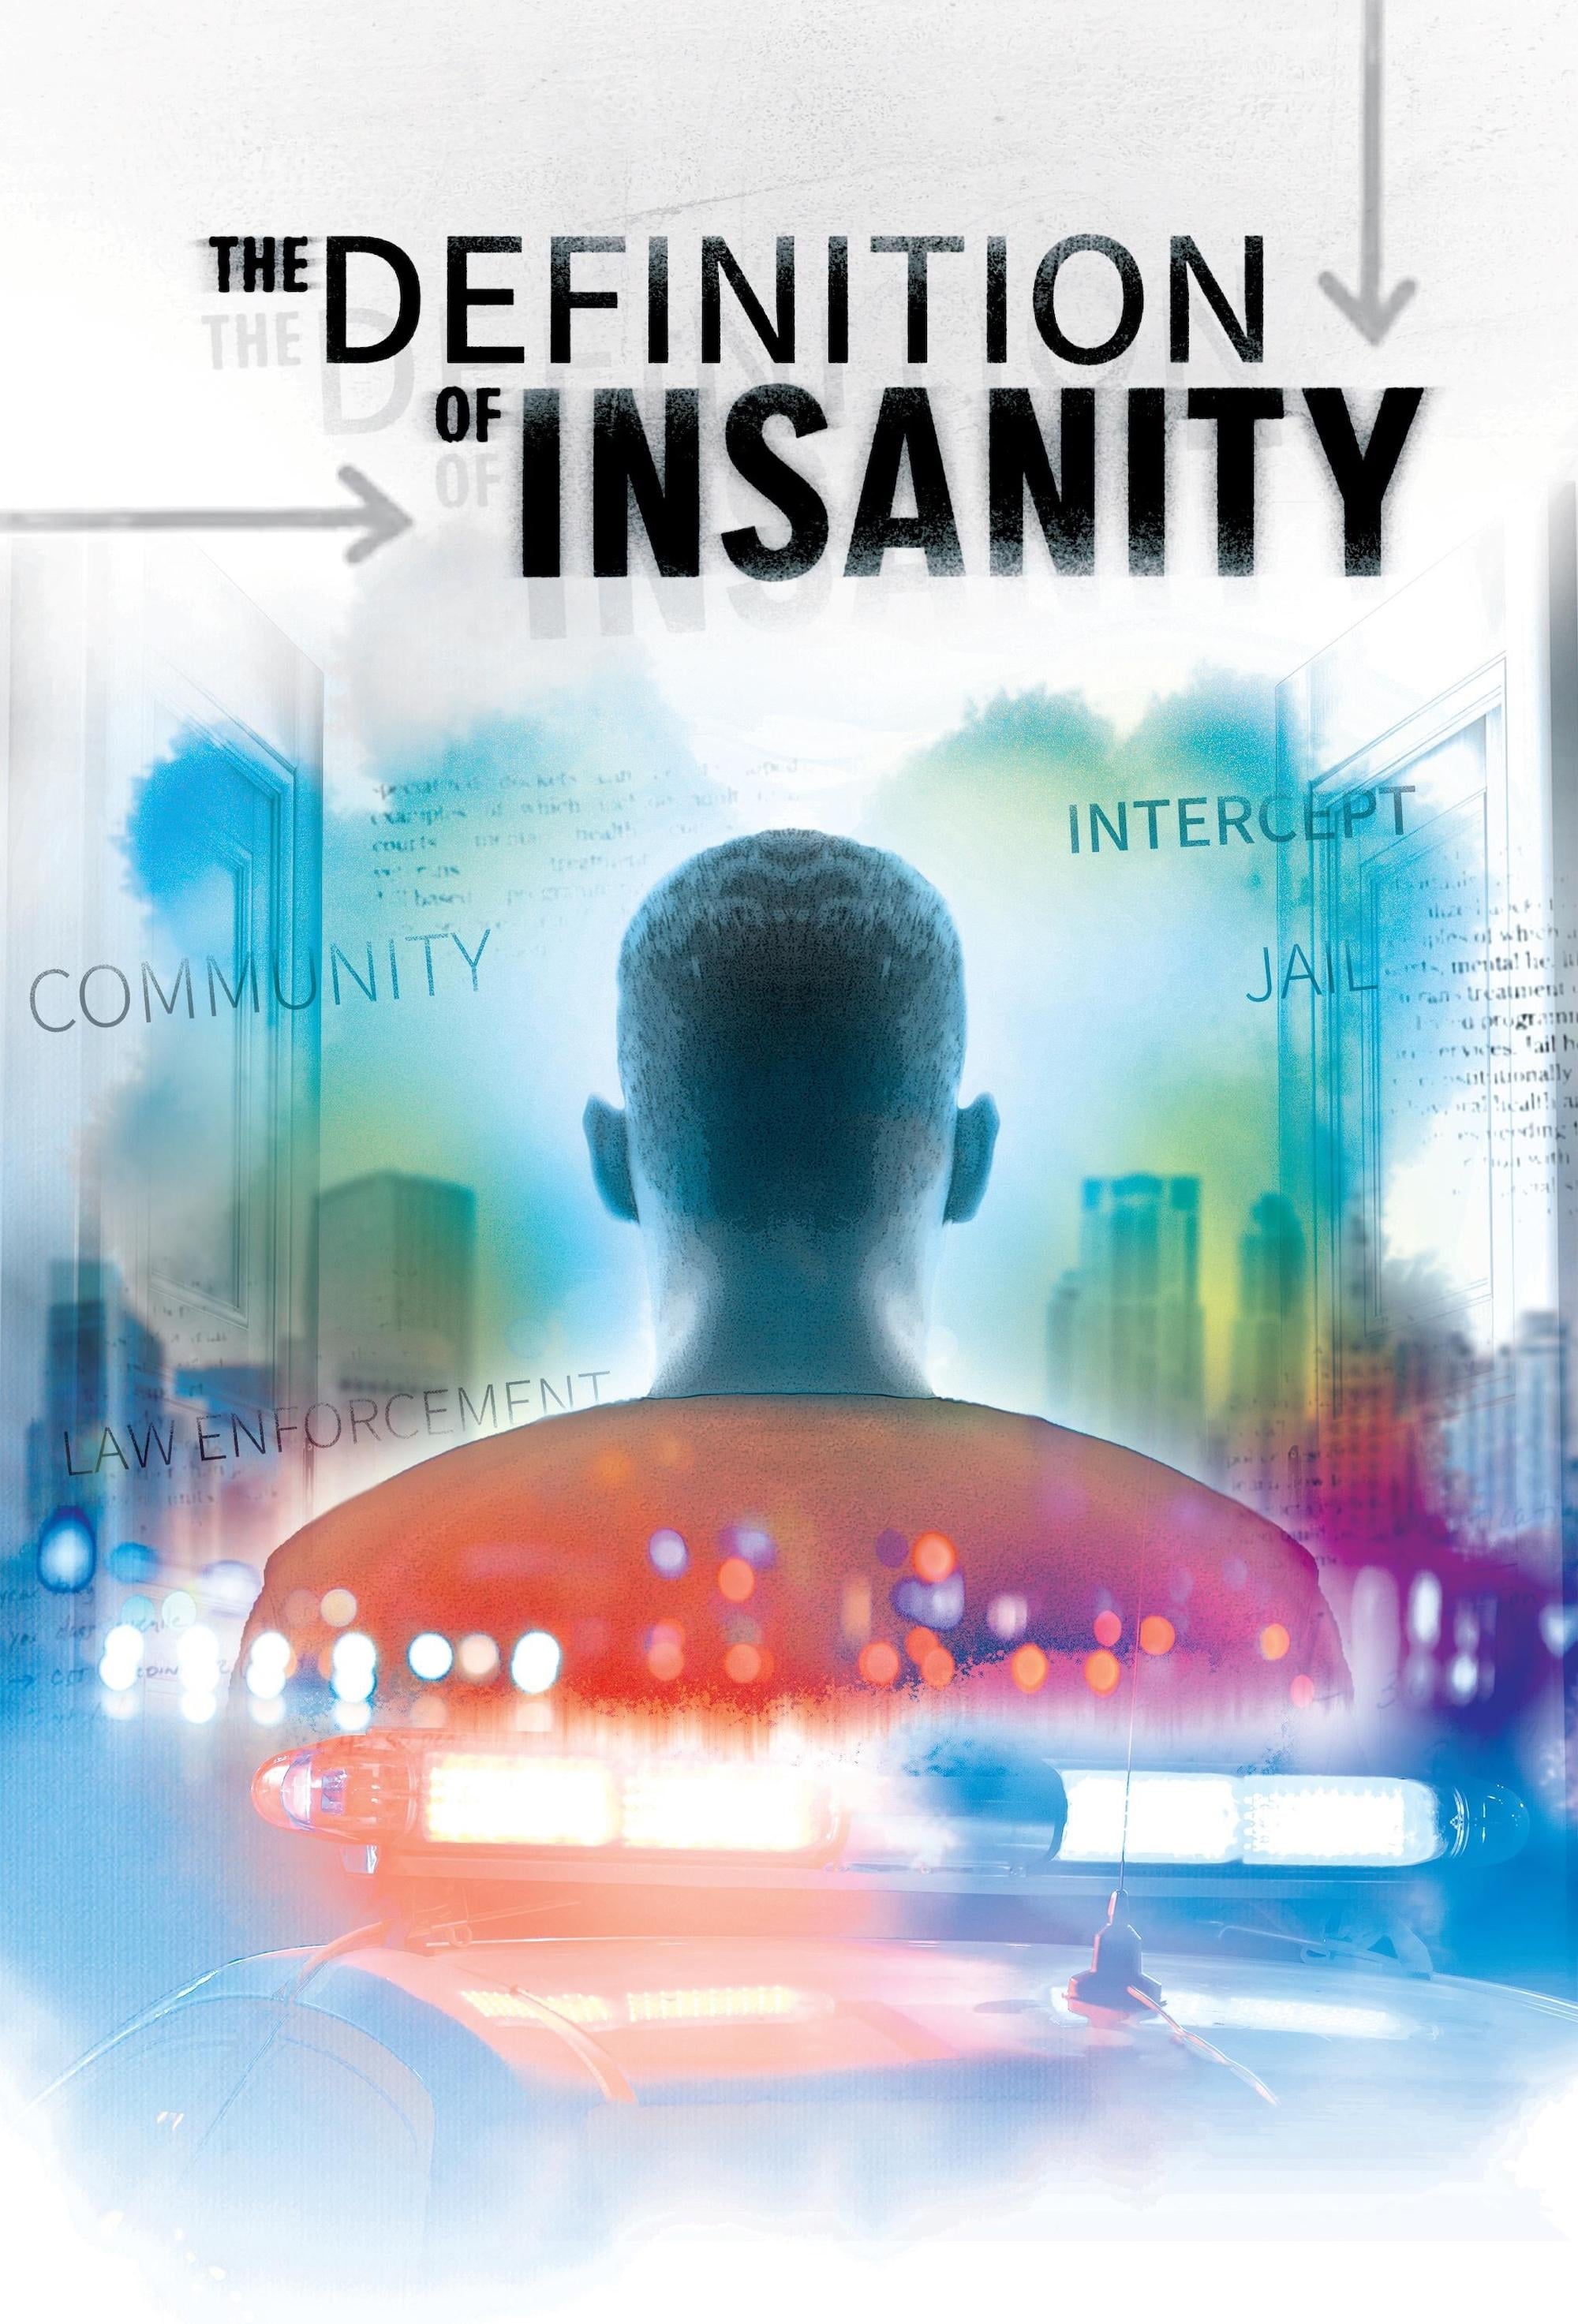 The Definition of Insanity film